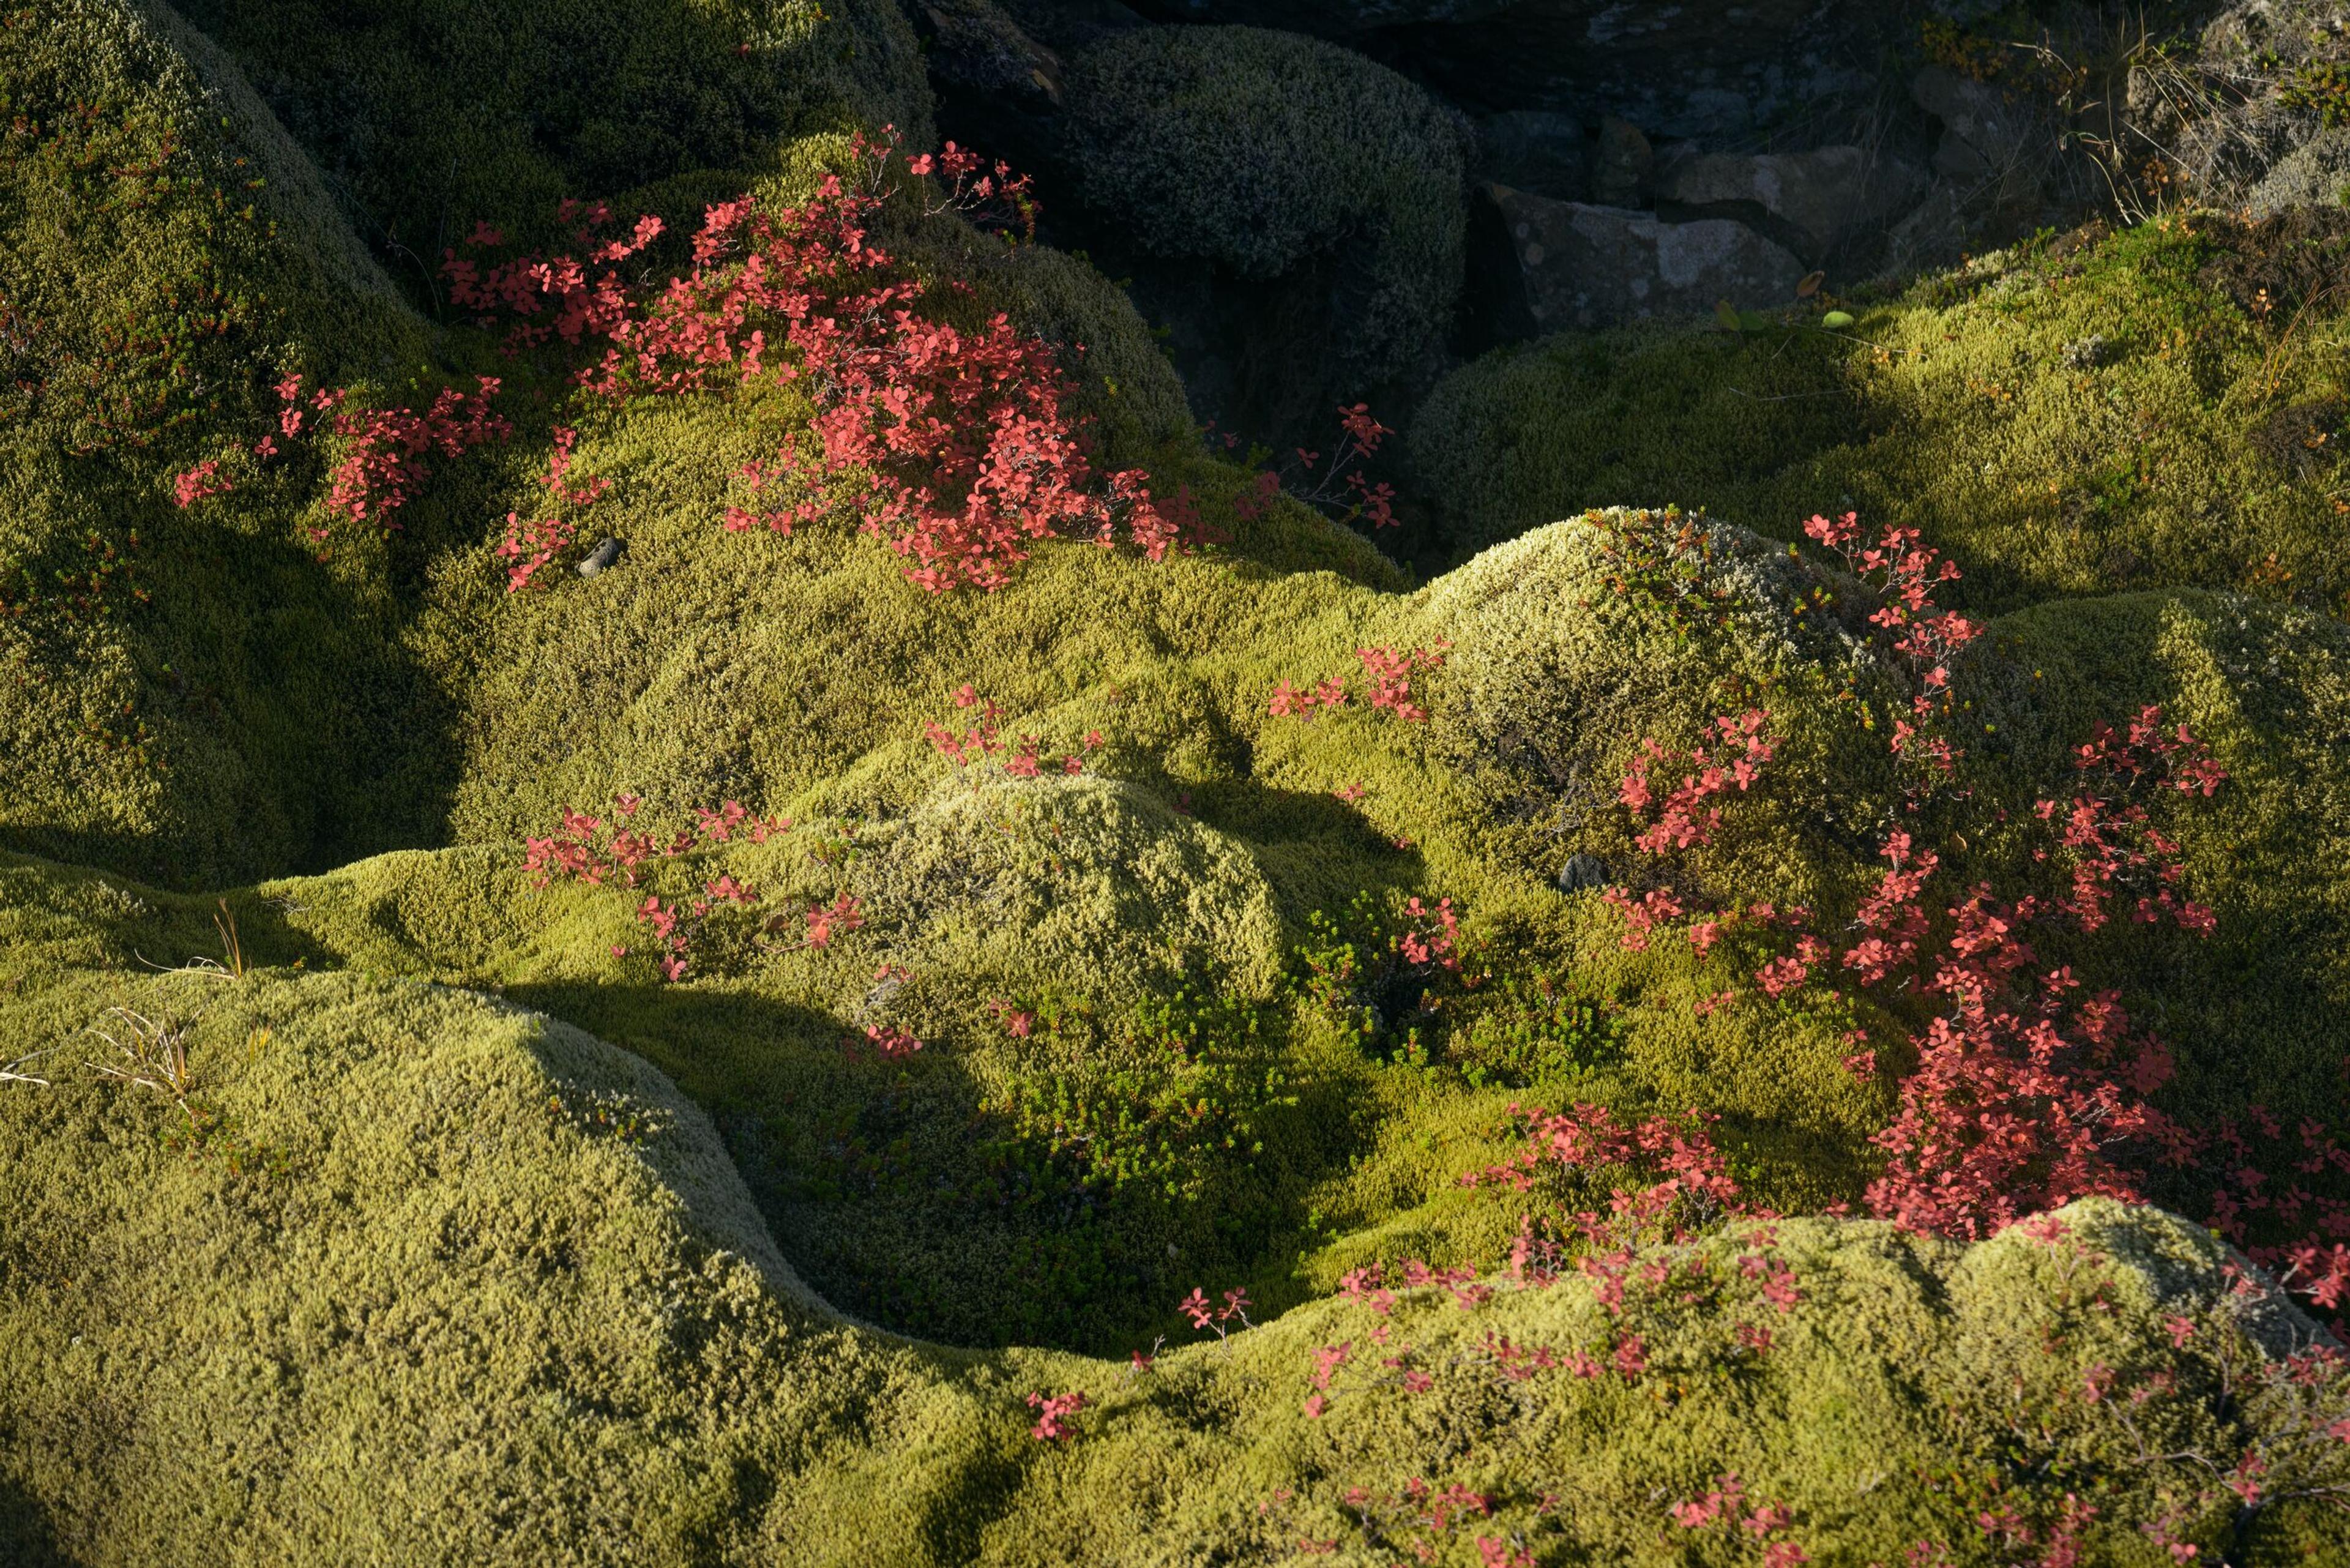 Close-up of a rocky landscape covered in lush green moss and interspersed with clusters of bright pink flowers, illuminated by warm sunlight.